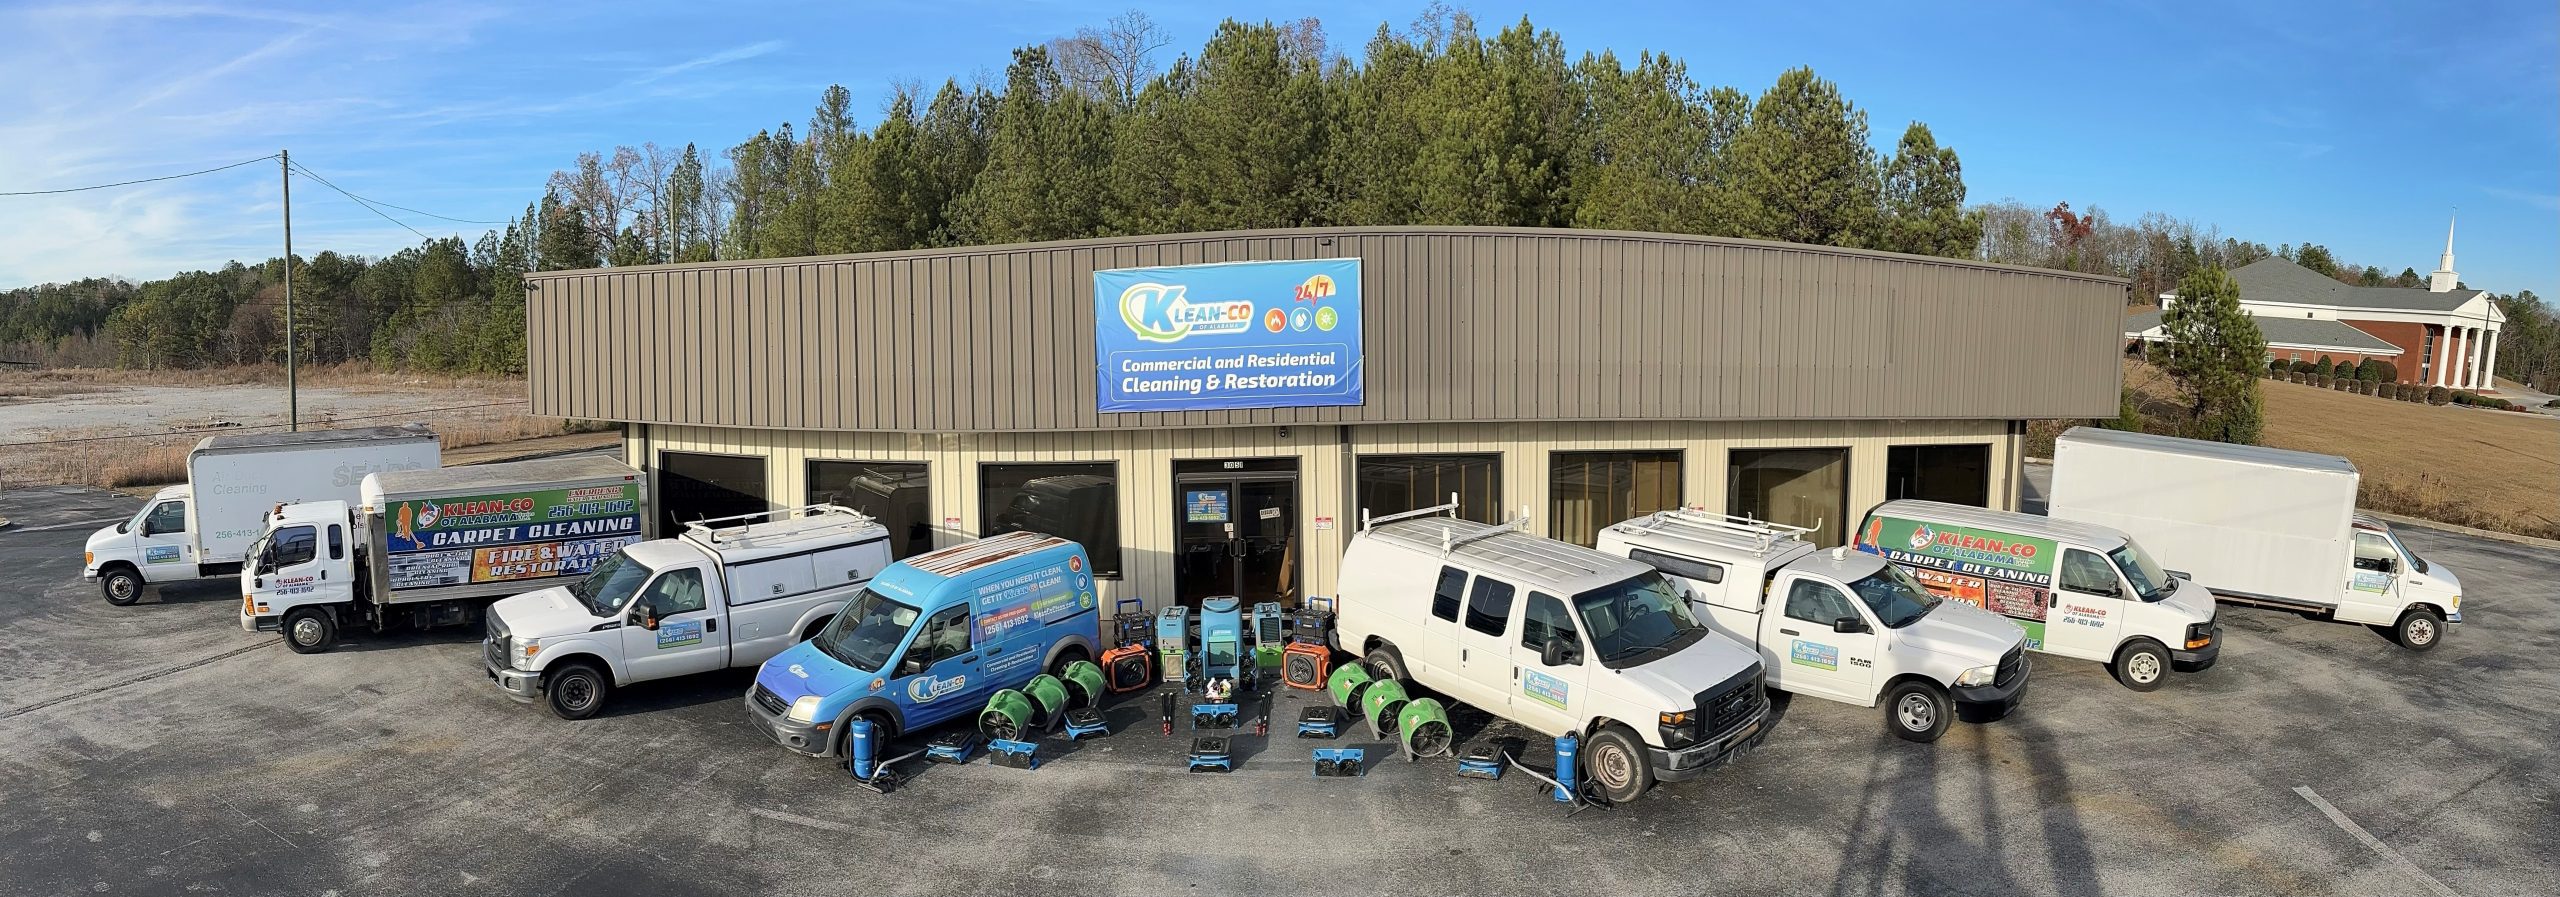 water damage restoration company equipment and vehicles for Klean-Co